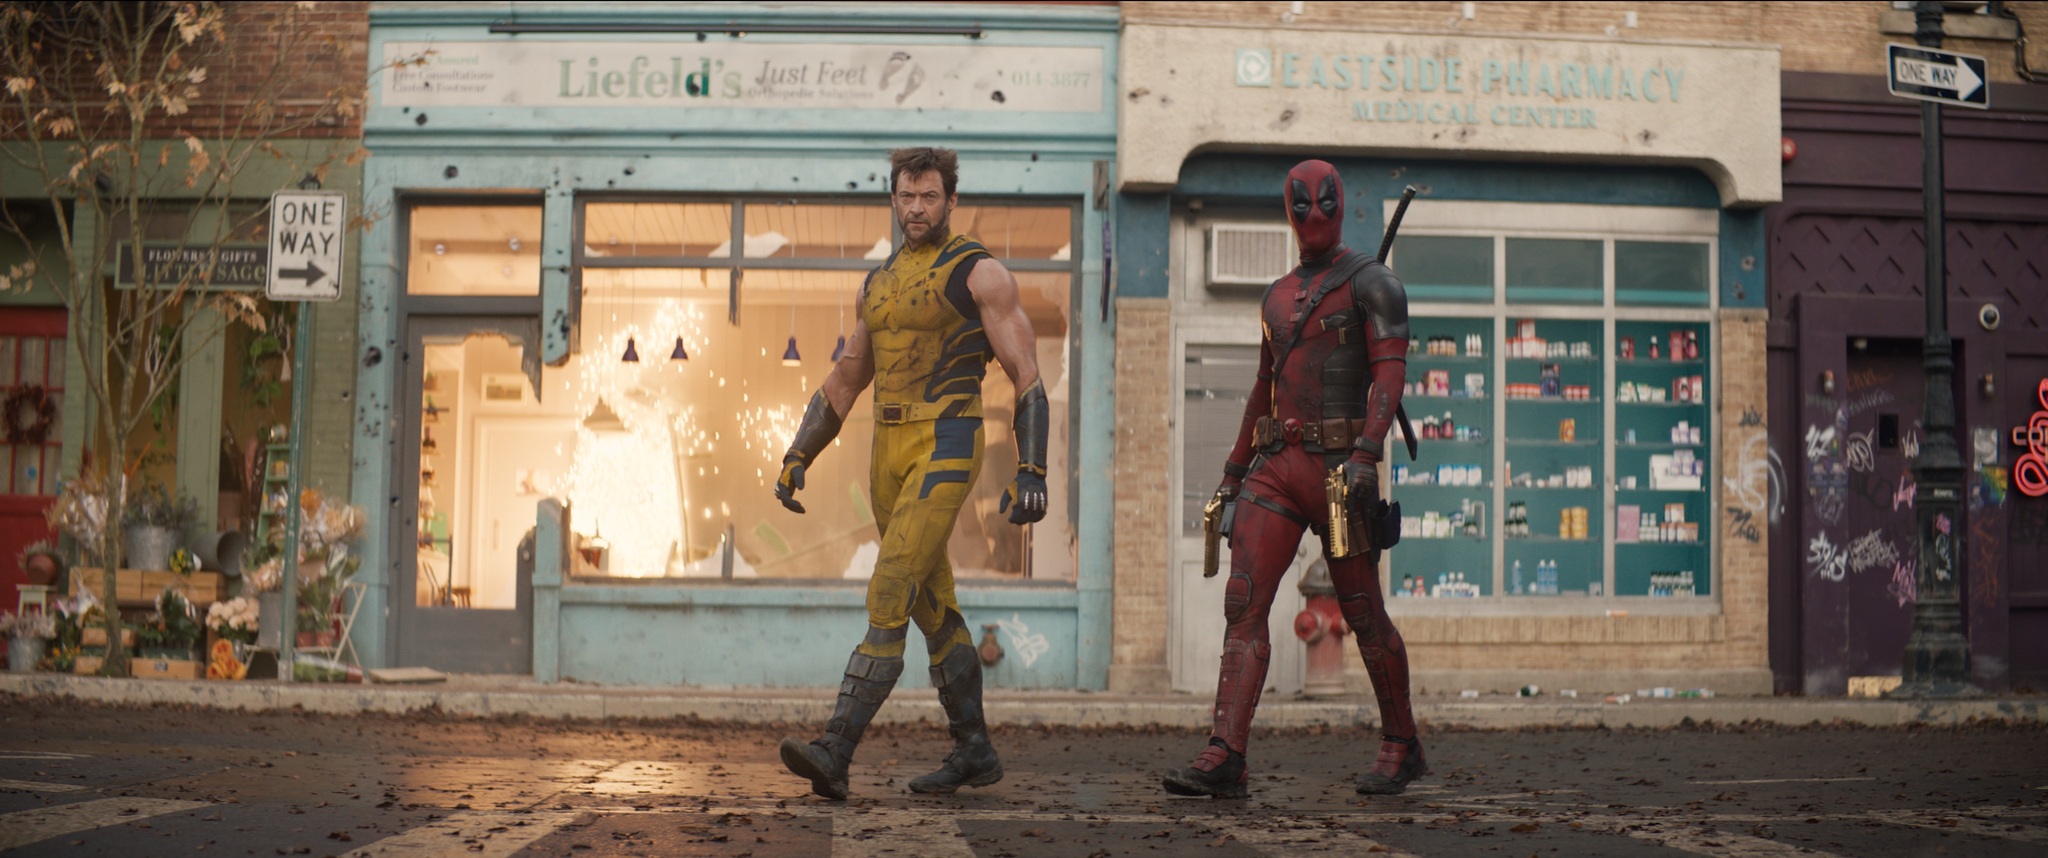 Deadpool & Wolverine Director Shawn Levy Says They Didn’t Have A Cameo Wishlist